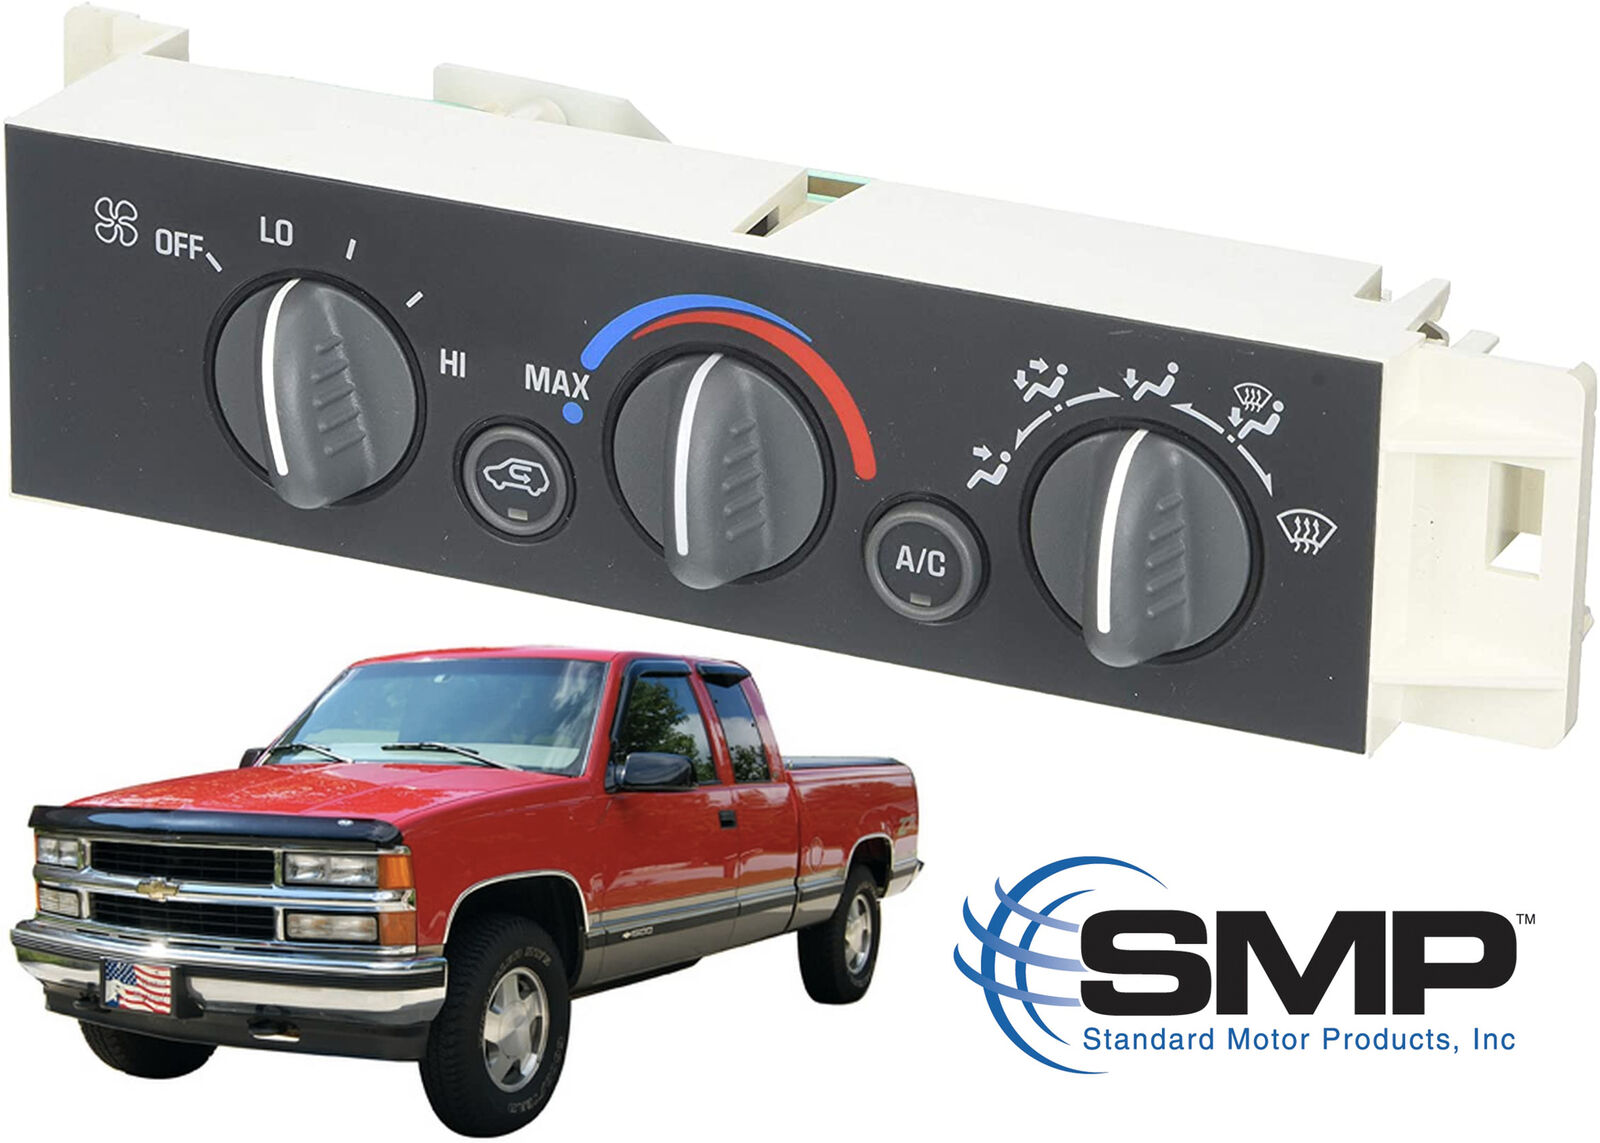 Replacement Air Conditioning & Heater Control Panel For 1996-1999 GM Trucks New